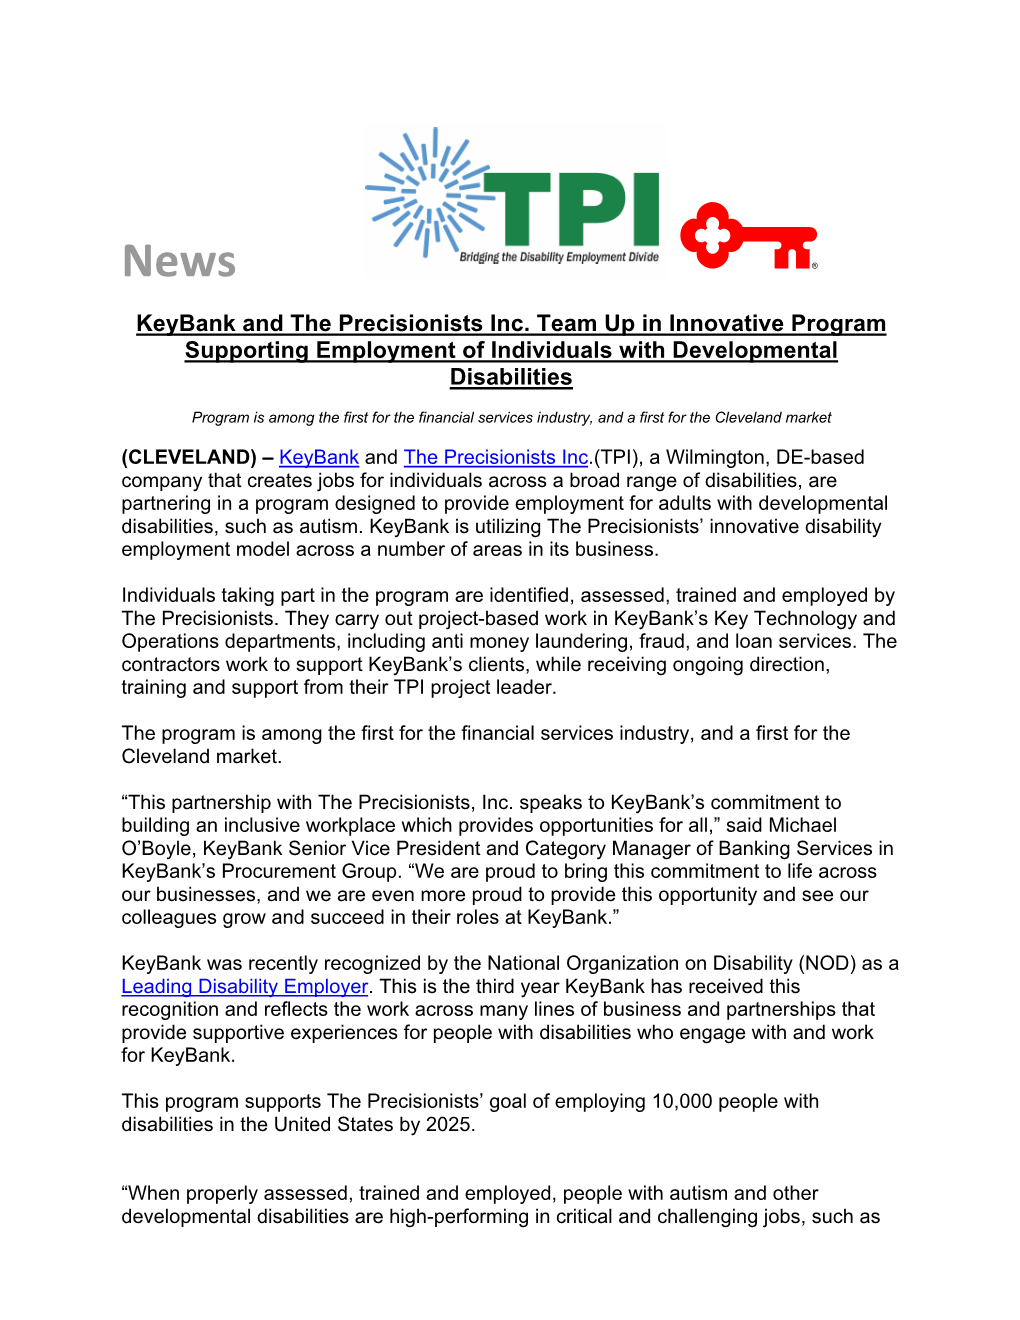 Keybank and the Precisionists Inc. Team up in Innovative Program Supporting Employment of Individuals with Developmental Disabilities